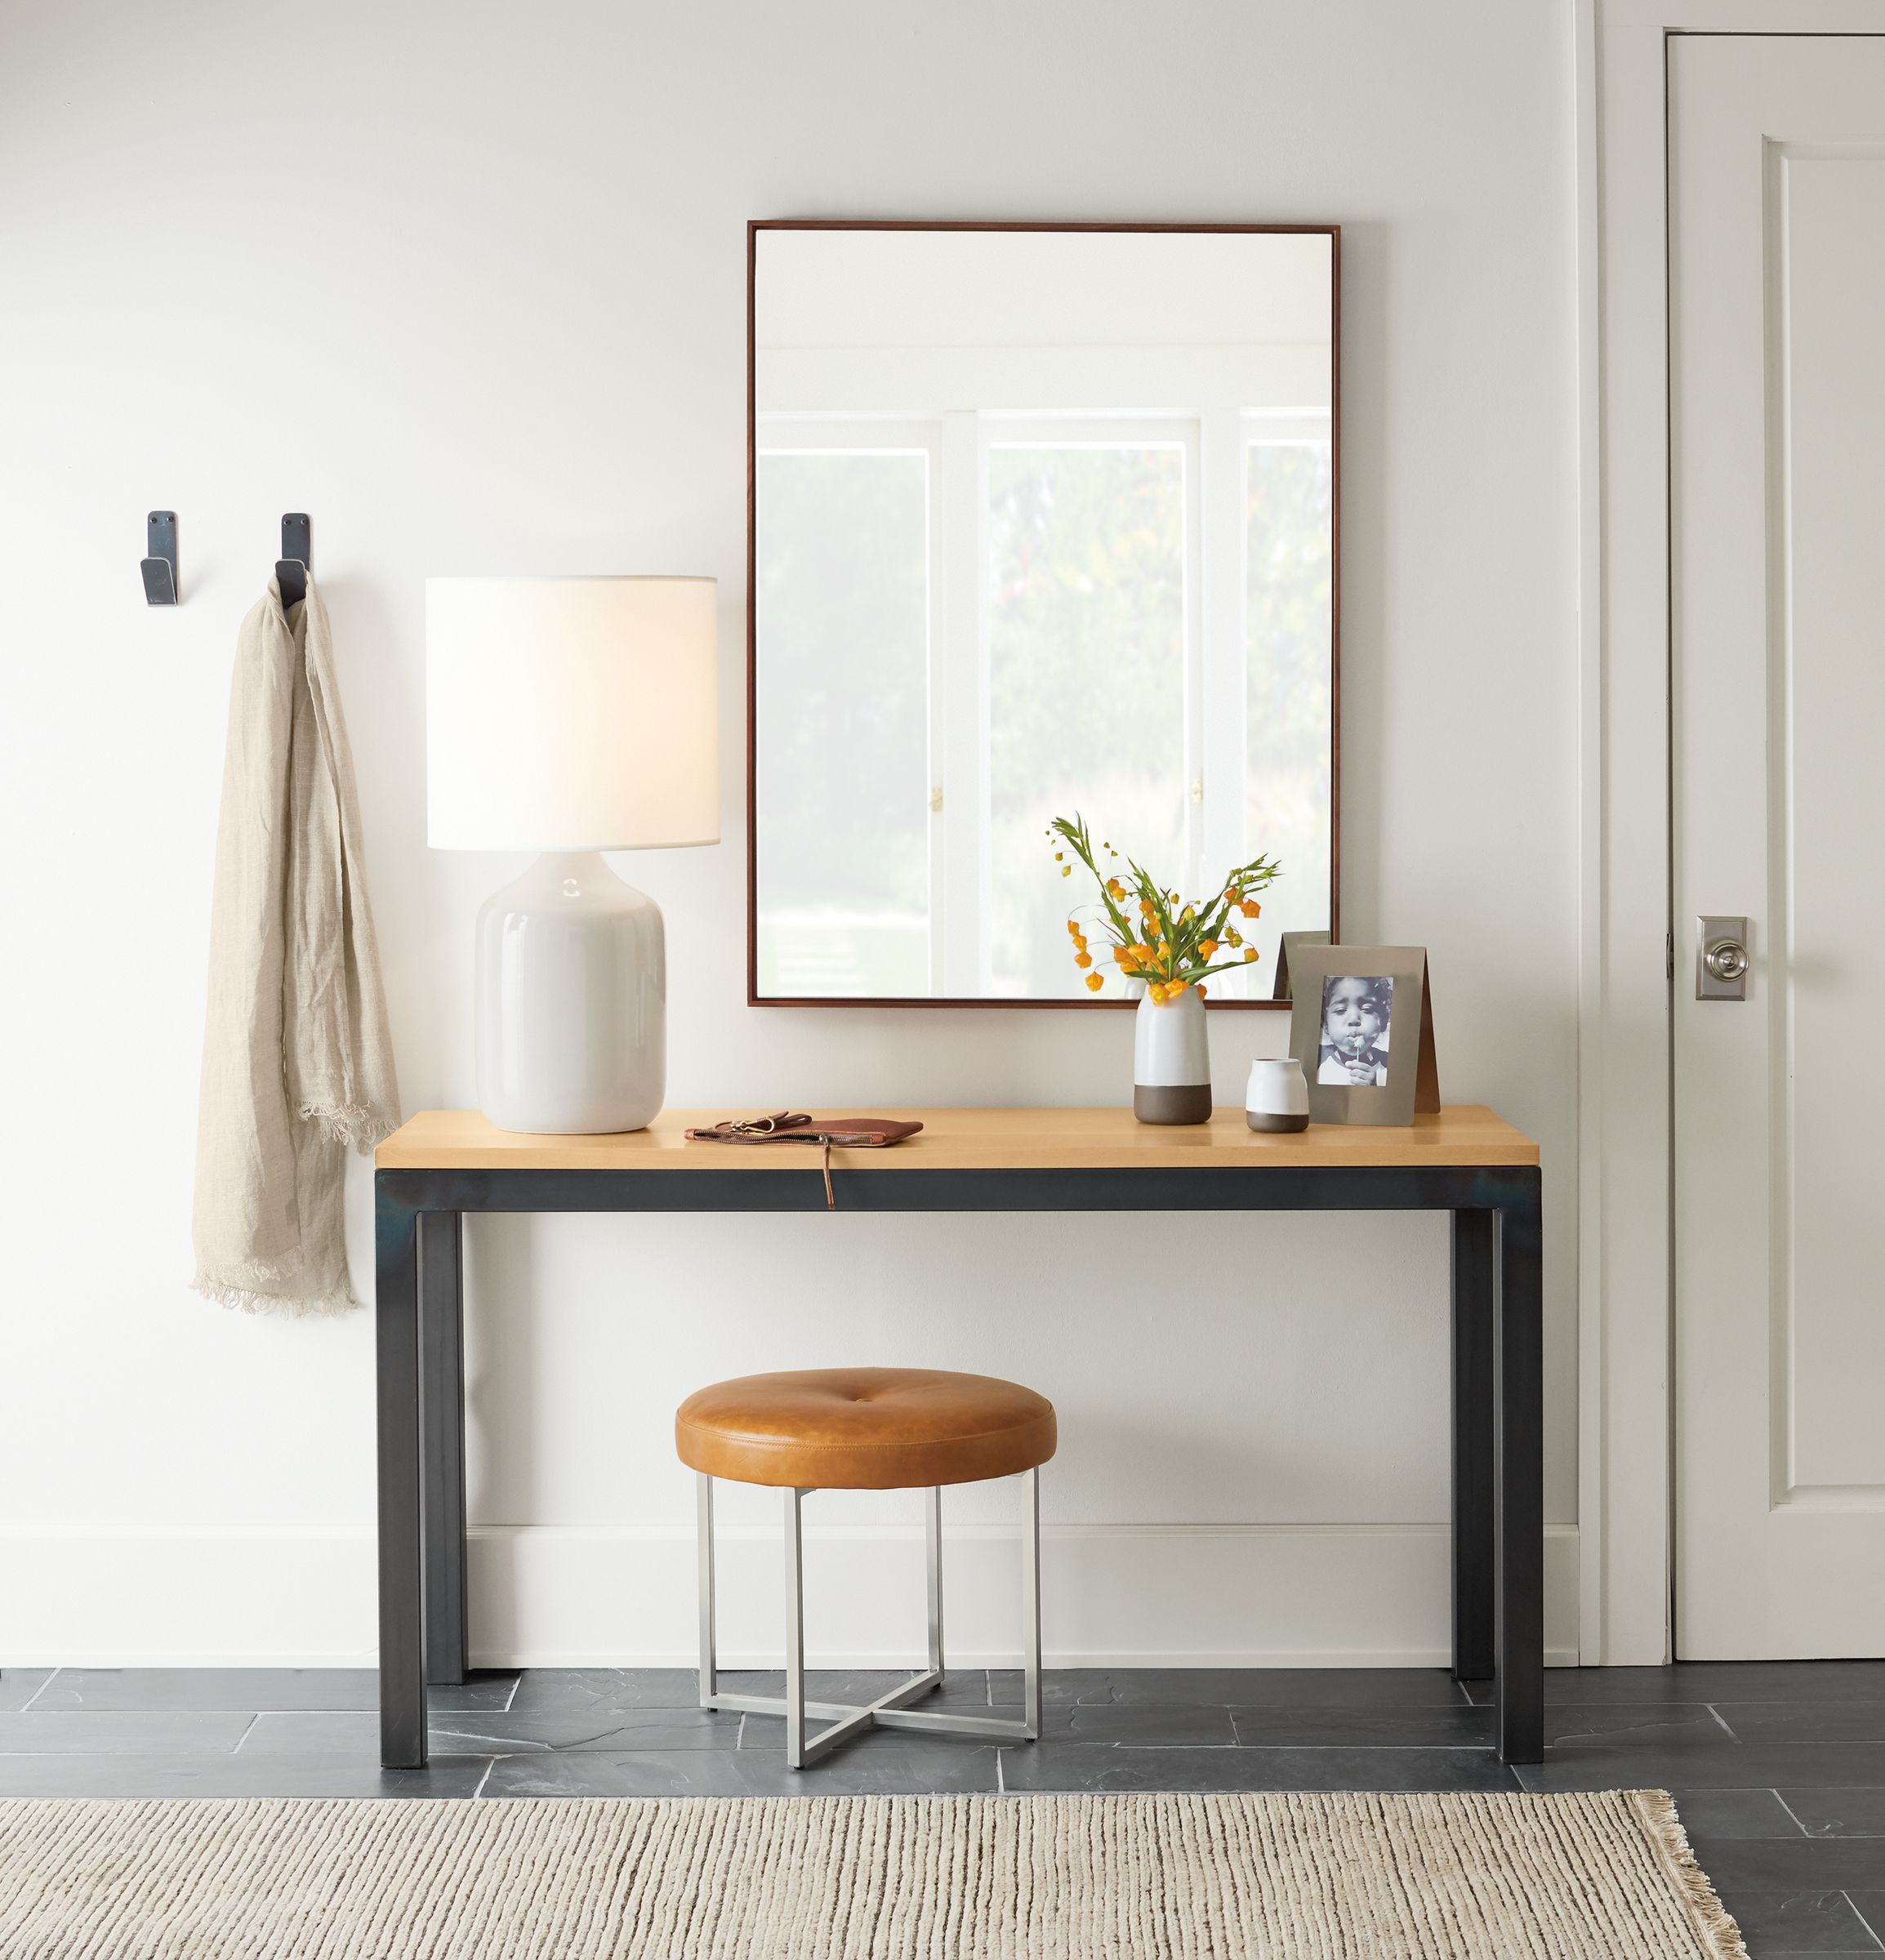 Parsons console table in small entryway.